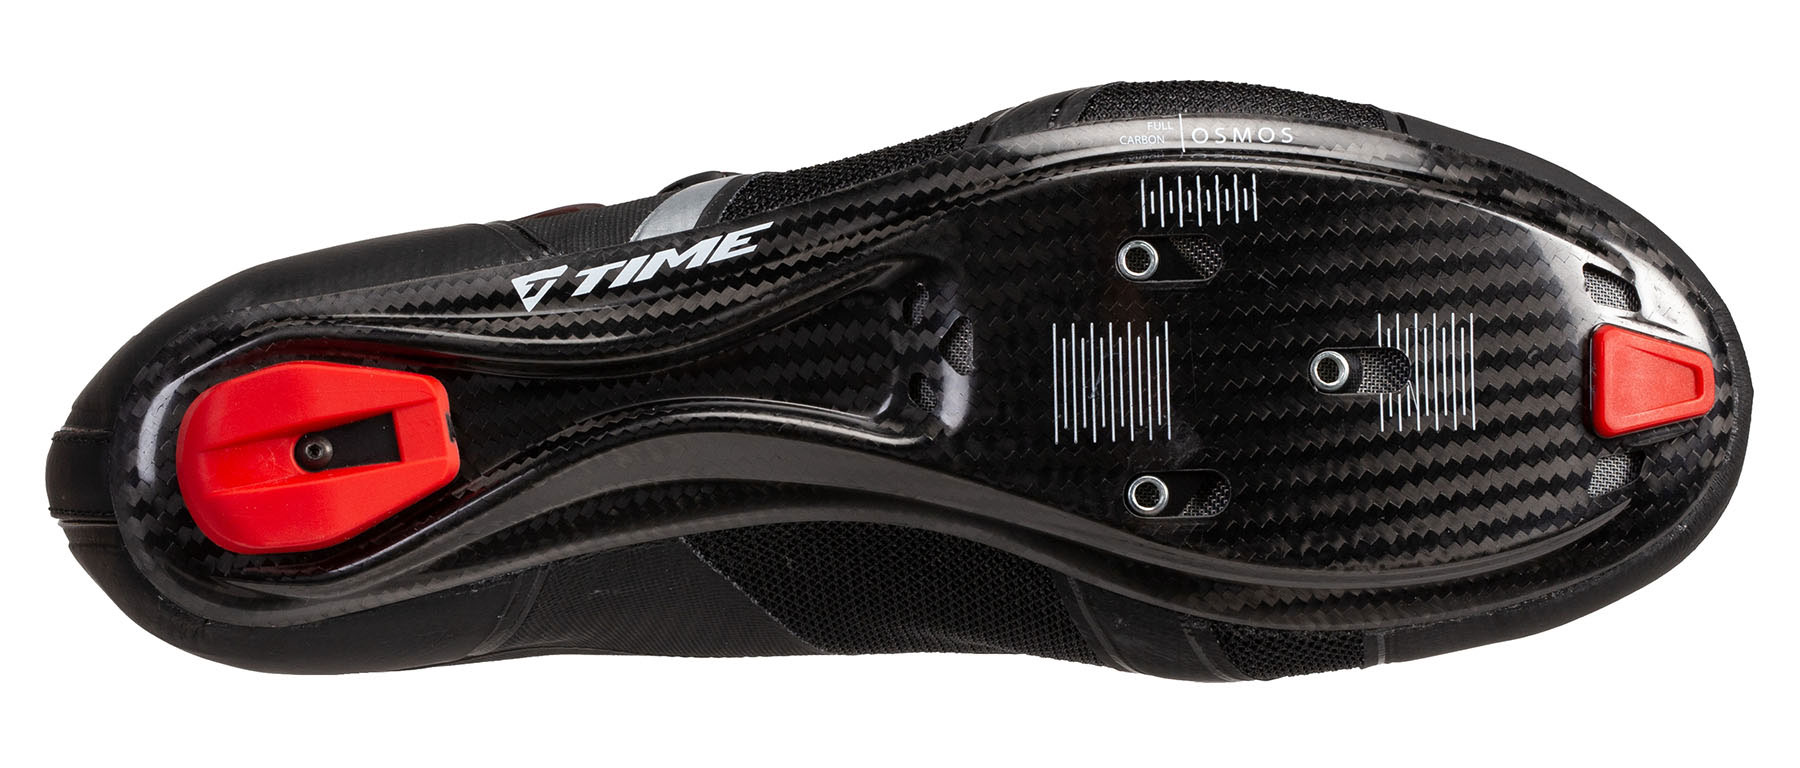 Time Osmos 15 Road Shoes